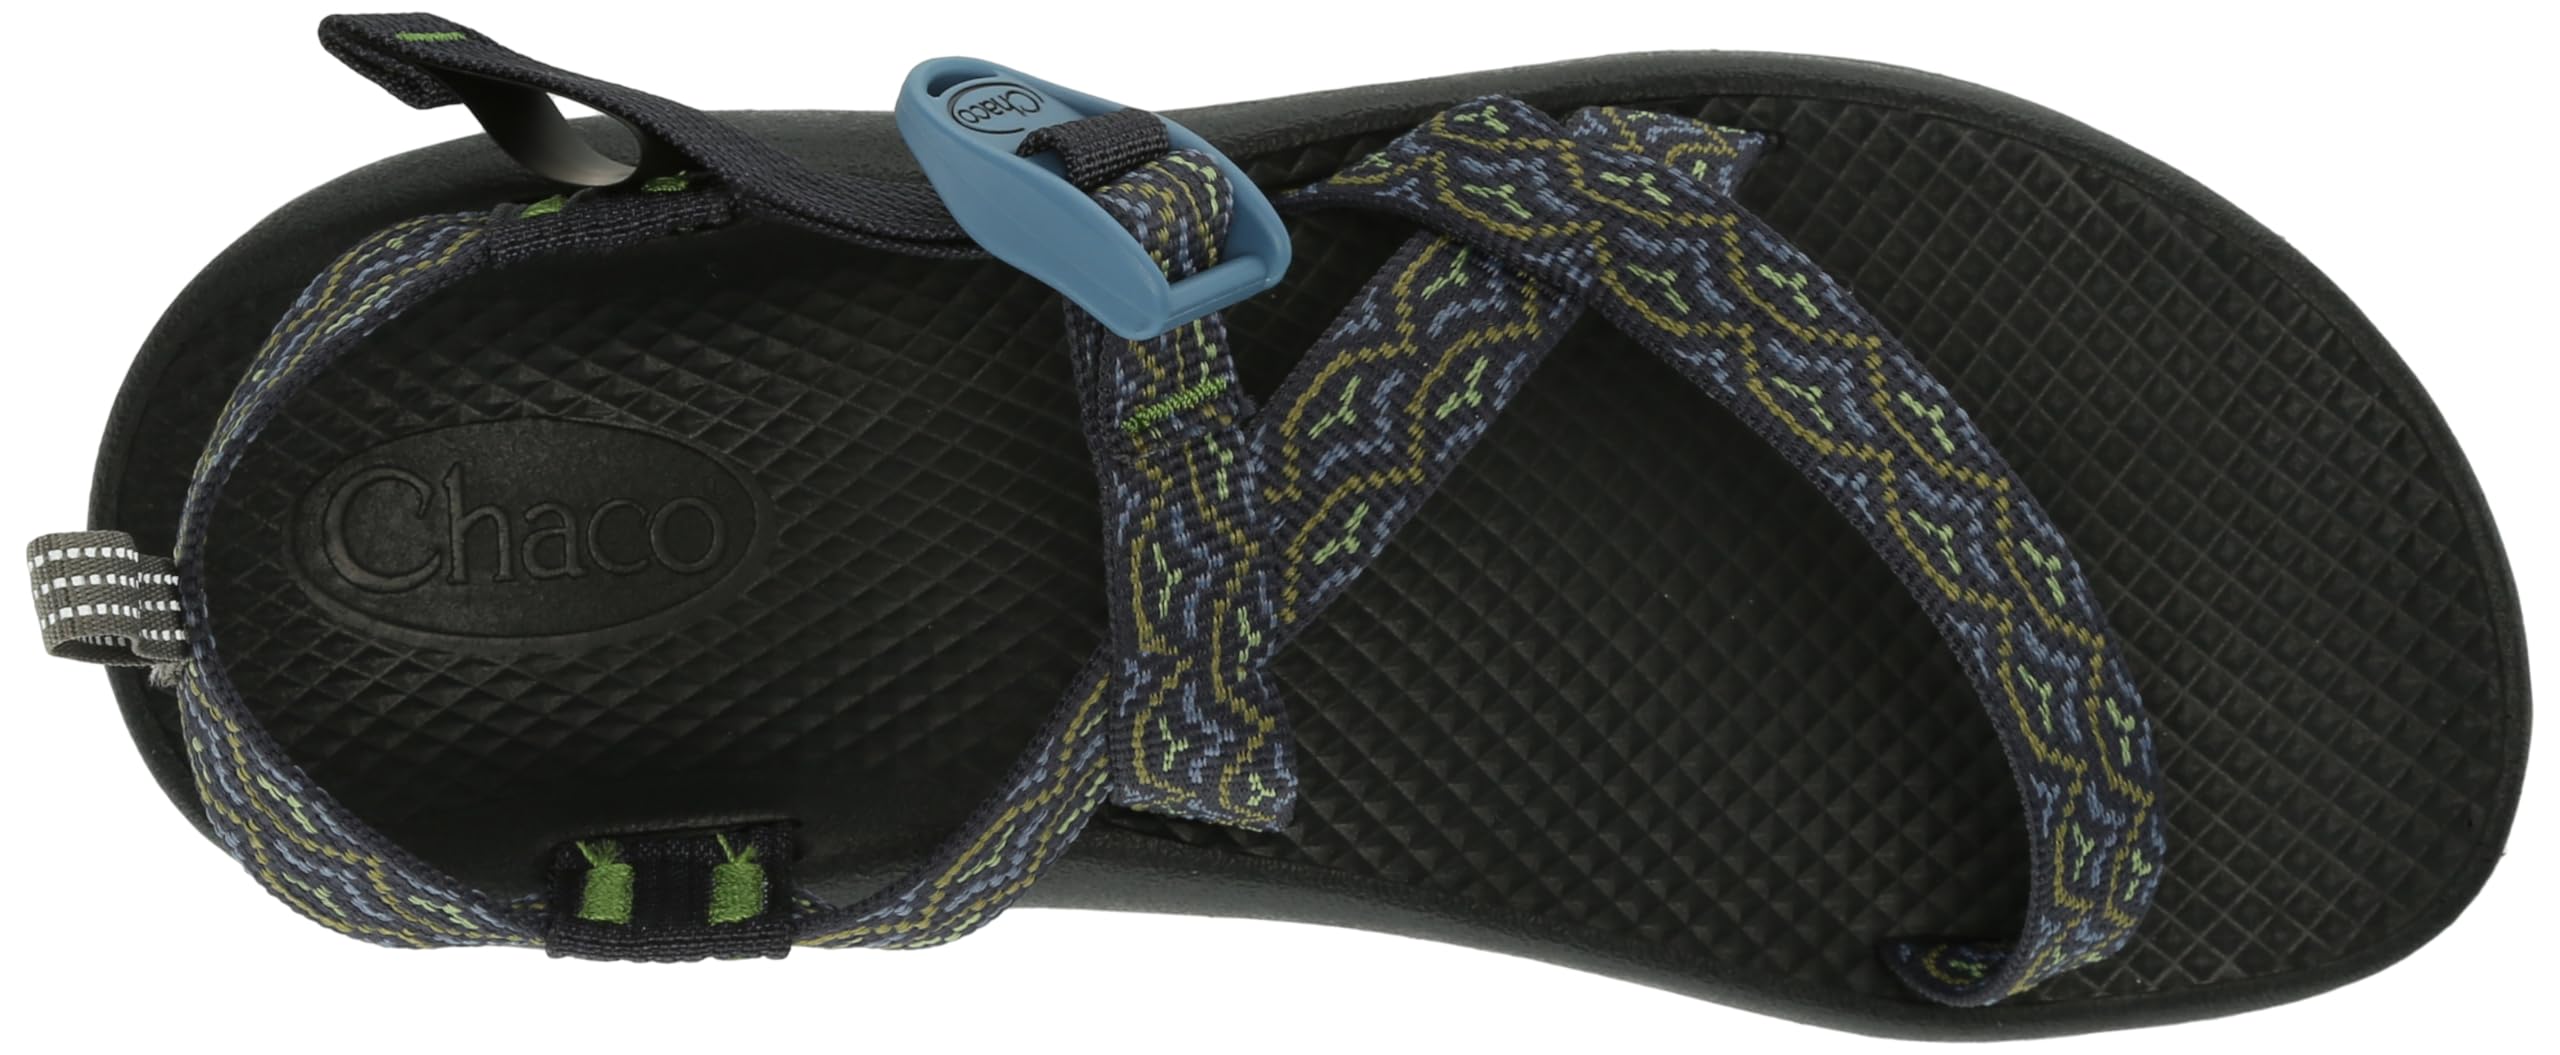 Chaco Unisex-Child Outdoor Sandal